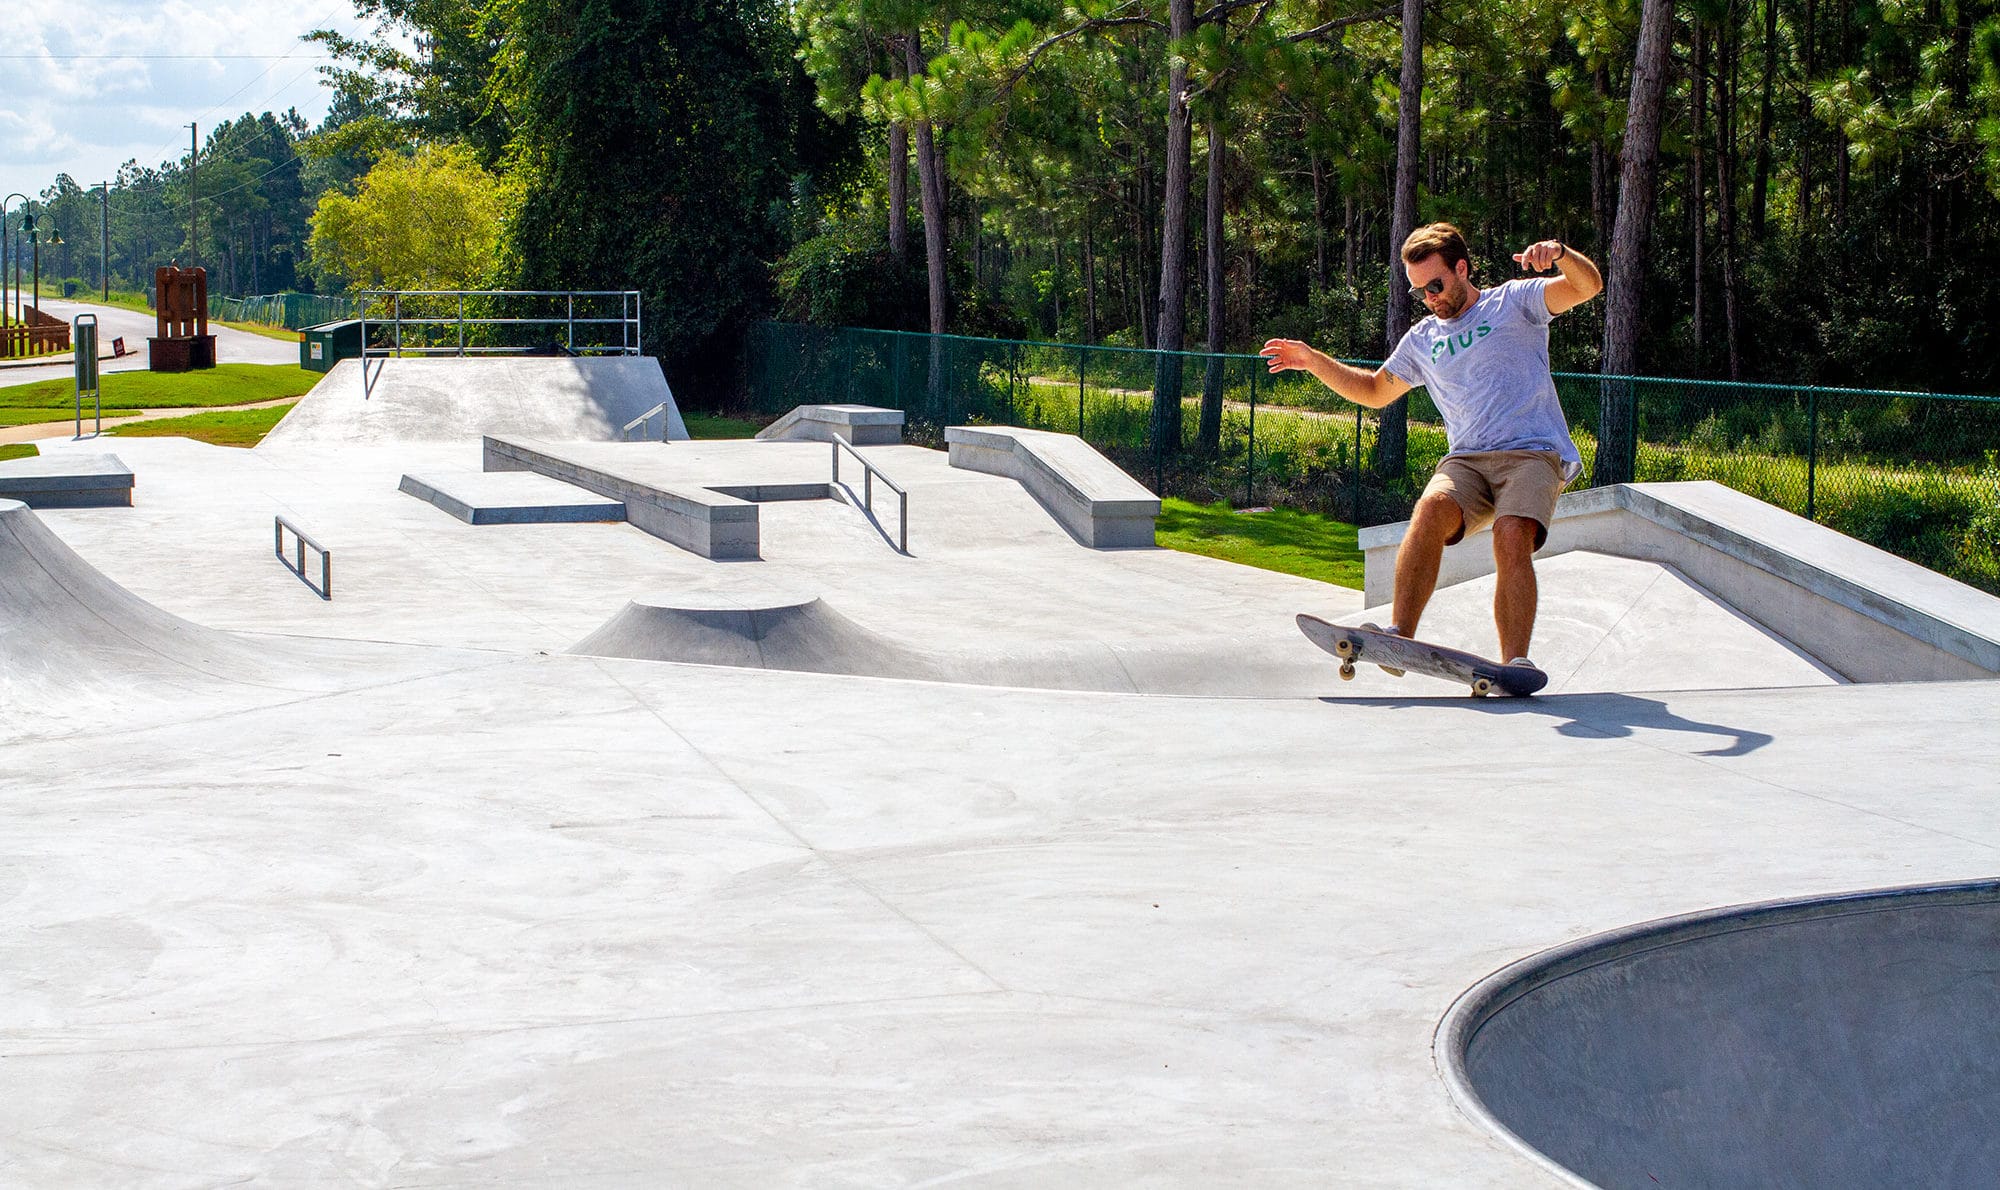 frontside 5.0 in the turnaround transition at the Walton County Skatepark